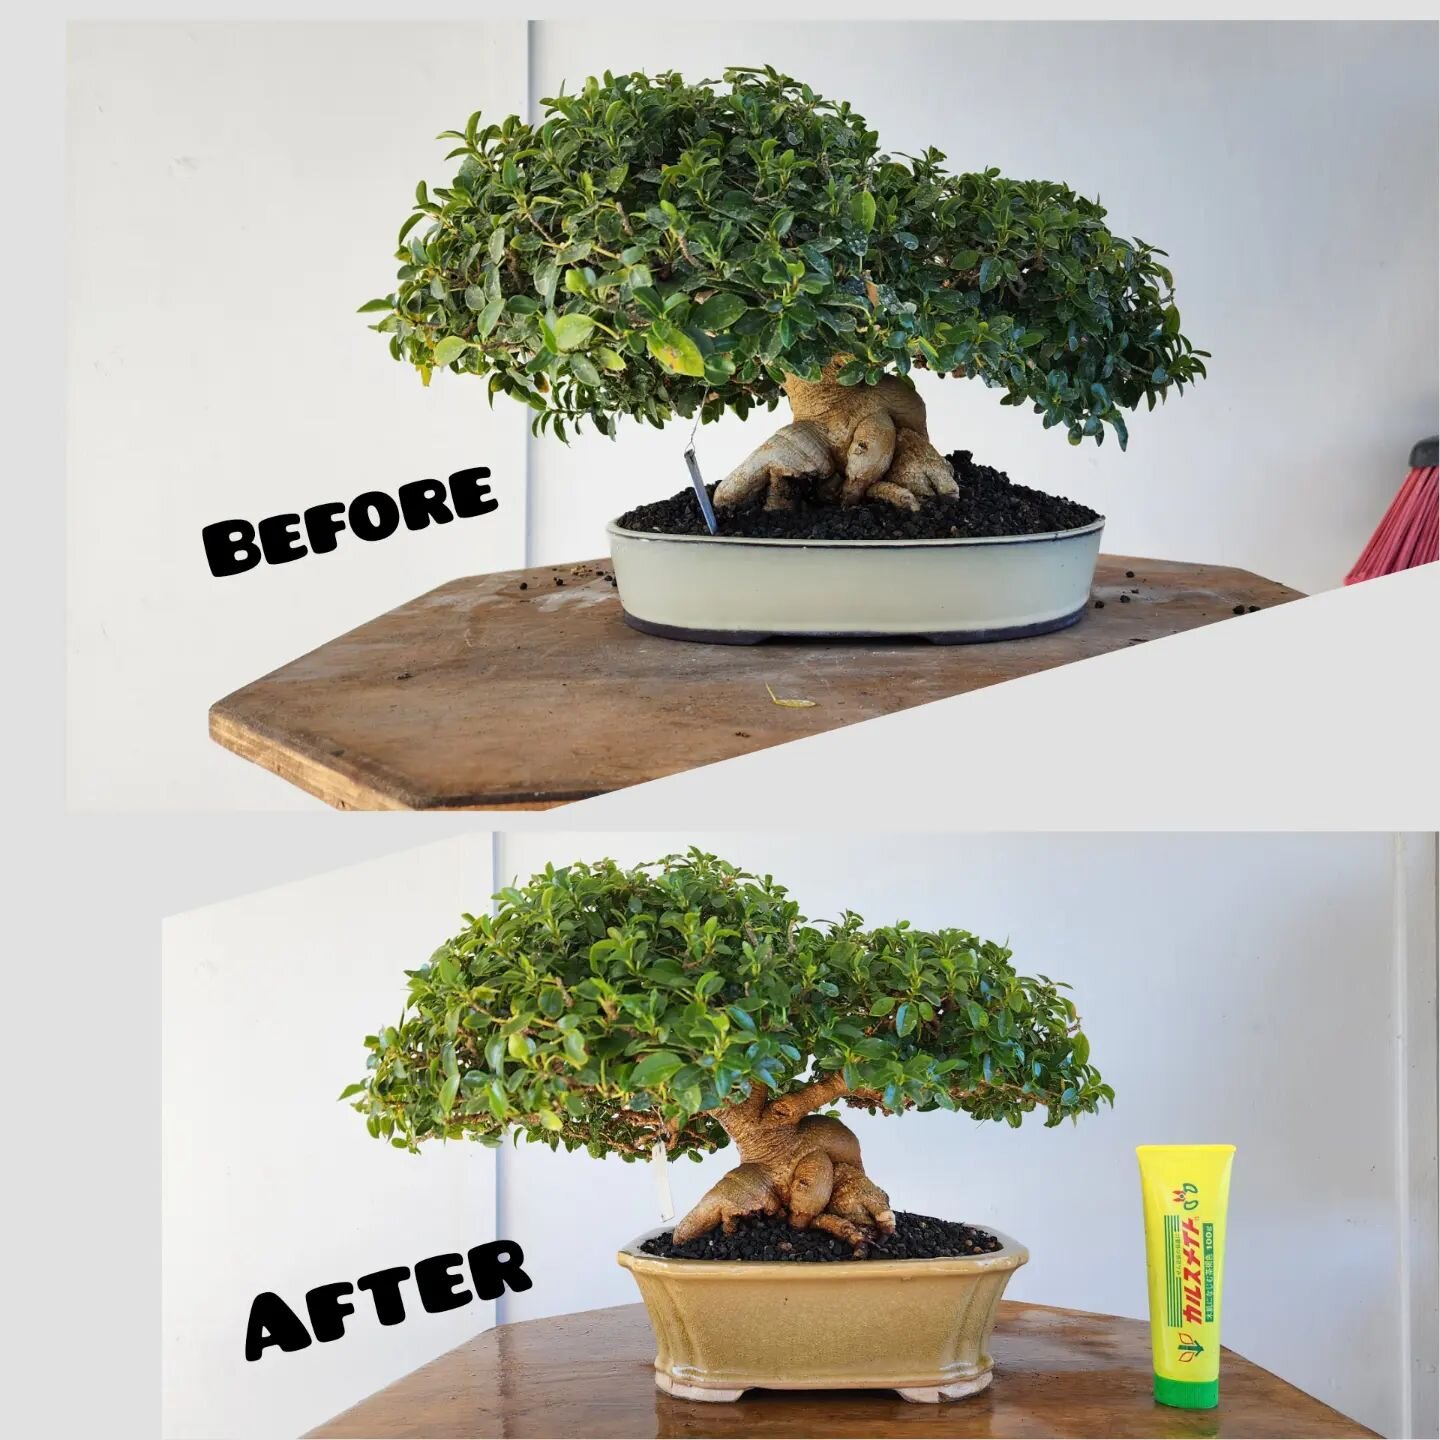 Another touch-up work on a 40yr/o Burtt-Davi ficus. I was gifted this tree by my first bonsai sensei 15 yrs ago.